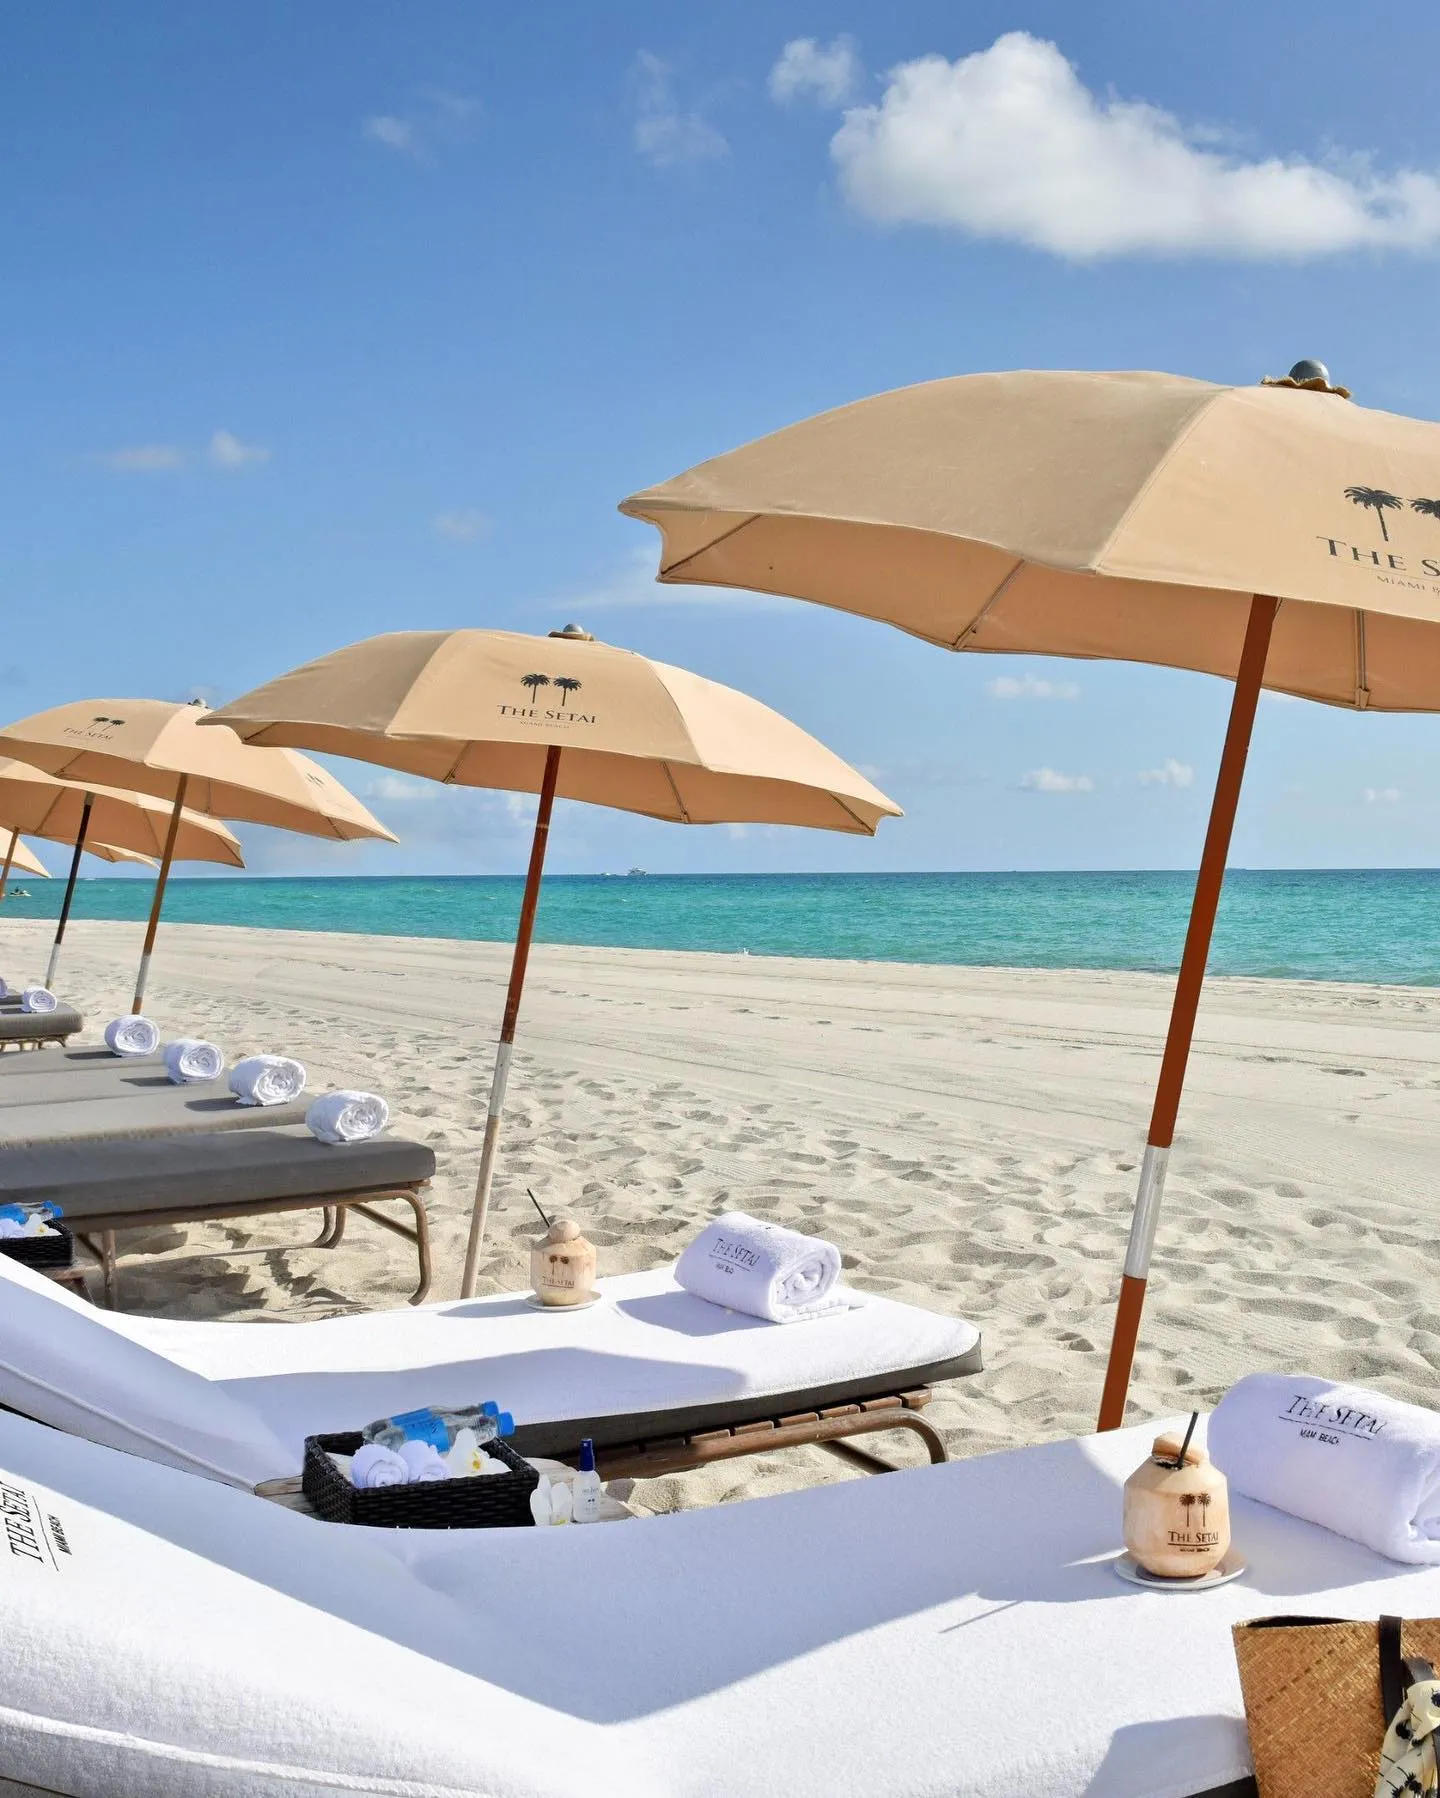 image  1 The Setai, Miami Beach - Bask in endless summer days with the Florida Resident Offer